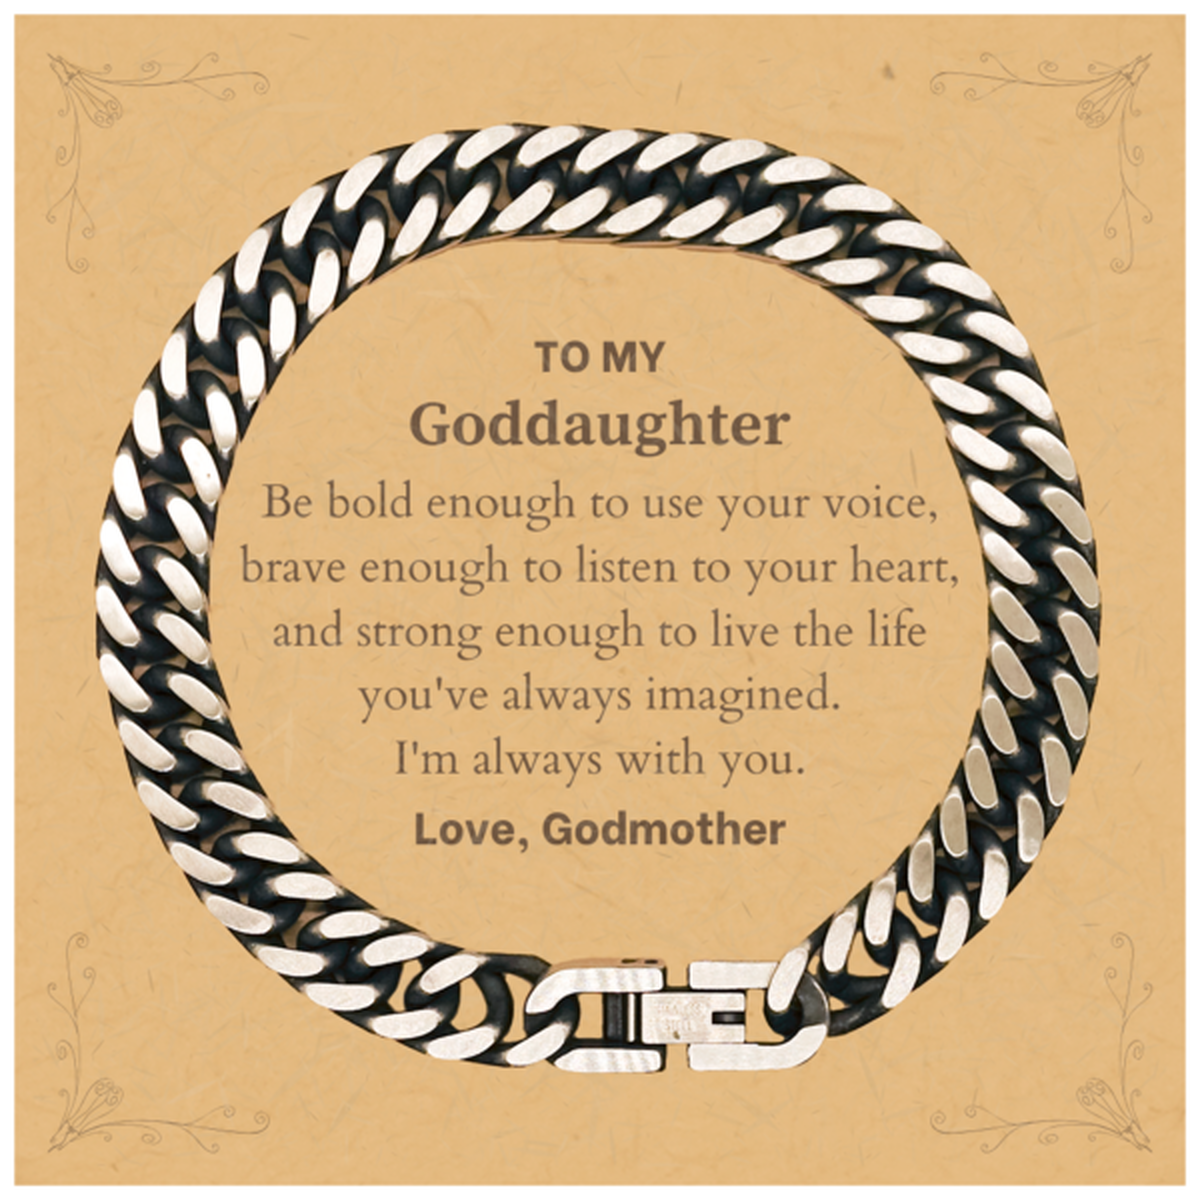 Keepsake Goddaughter Cuban Link Chain Bracelet Gift Idea Graduation Christmas Birthday Goddaughter from Godmother, Goddaughter Be bold enough to use your voice, brave enough to listen to your heart. Love, Godmother